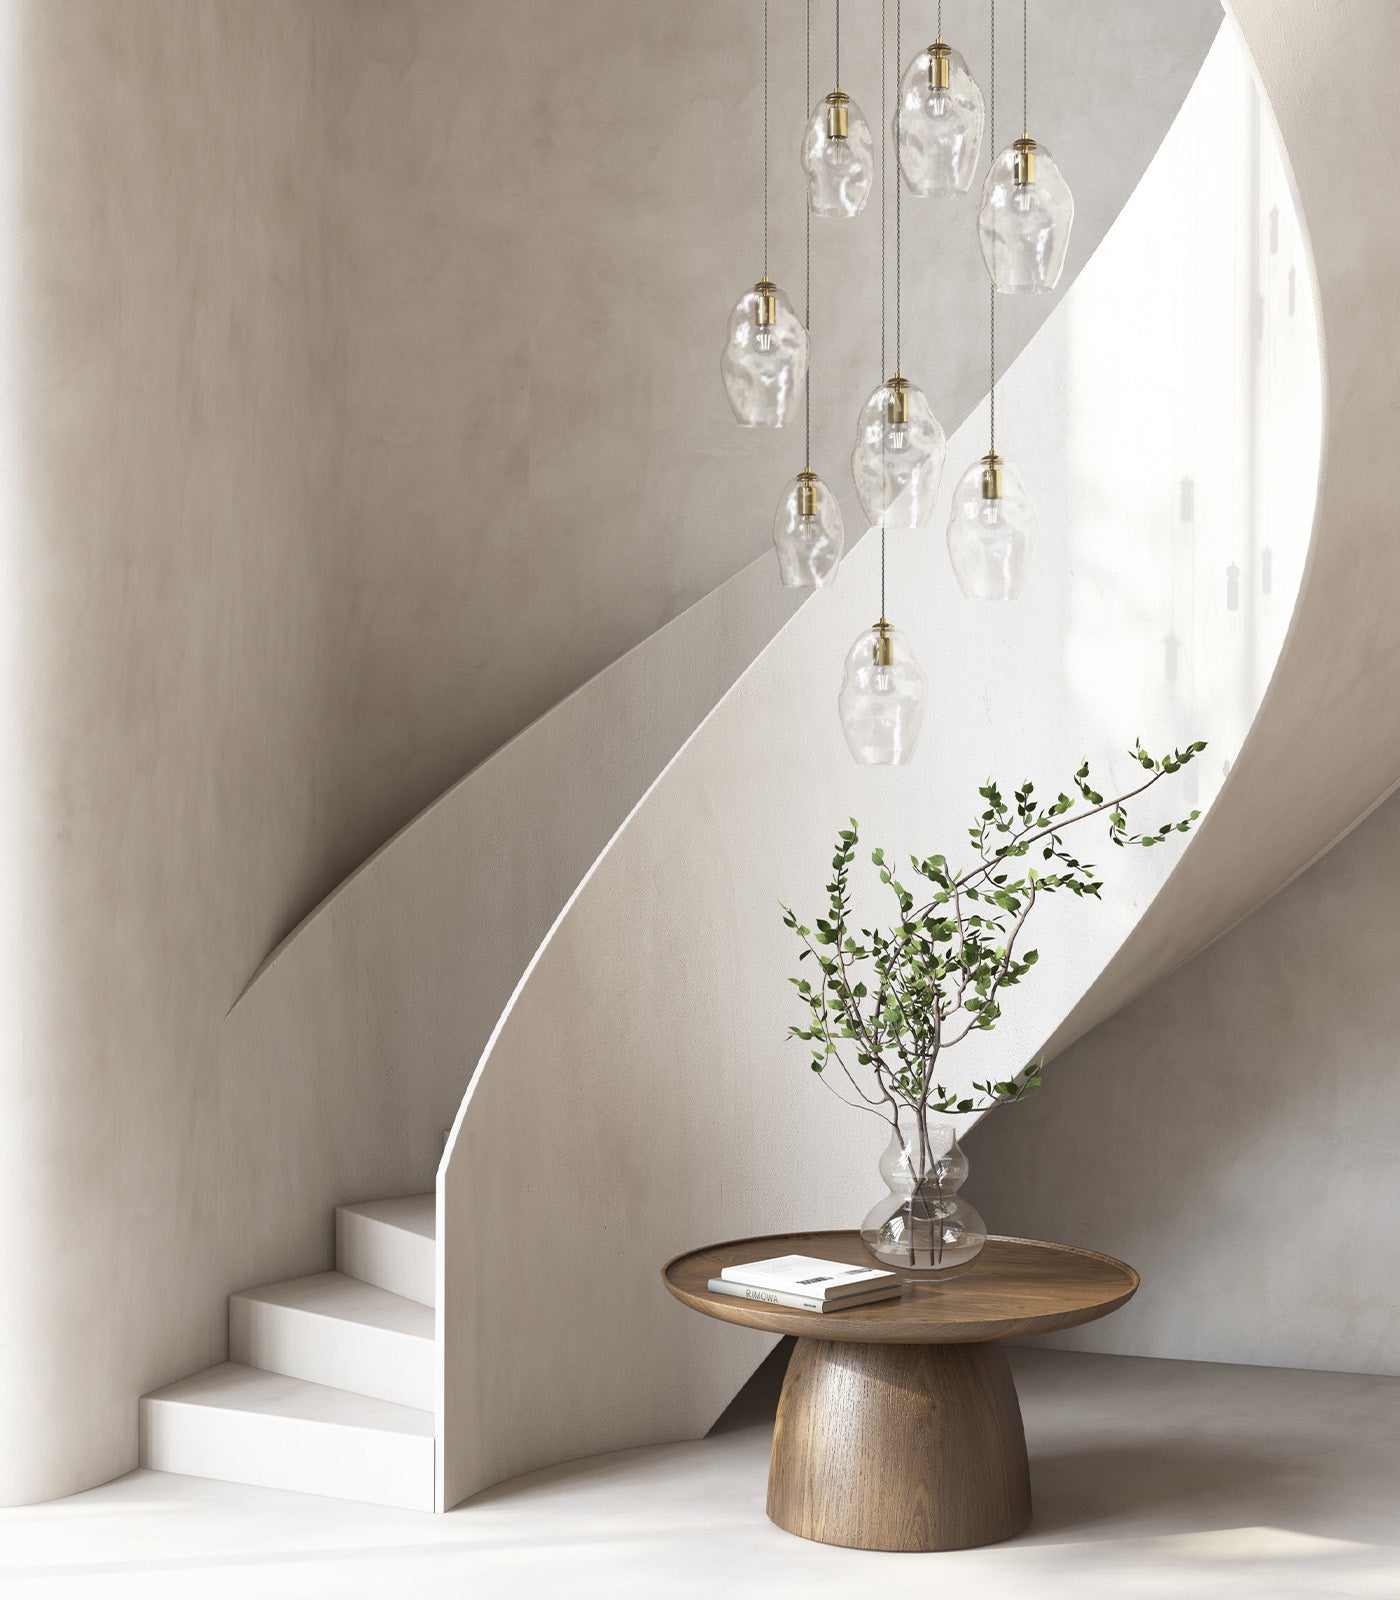 Contemporary house design featuring mouth-blown glass light fittings